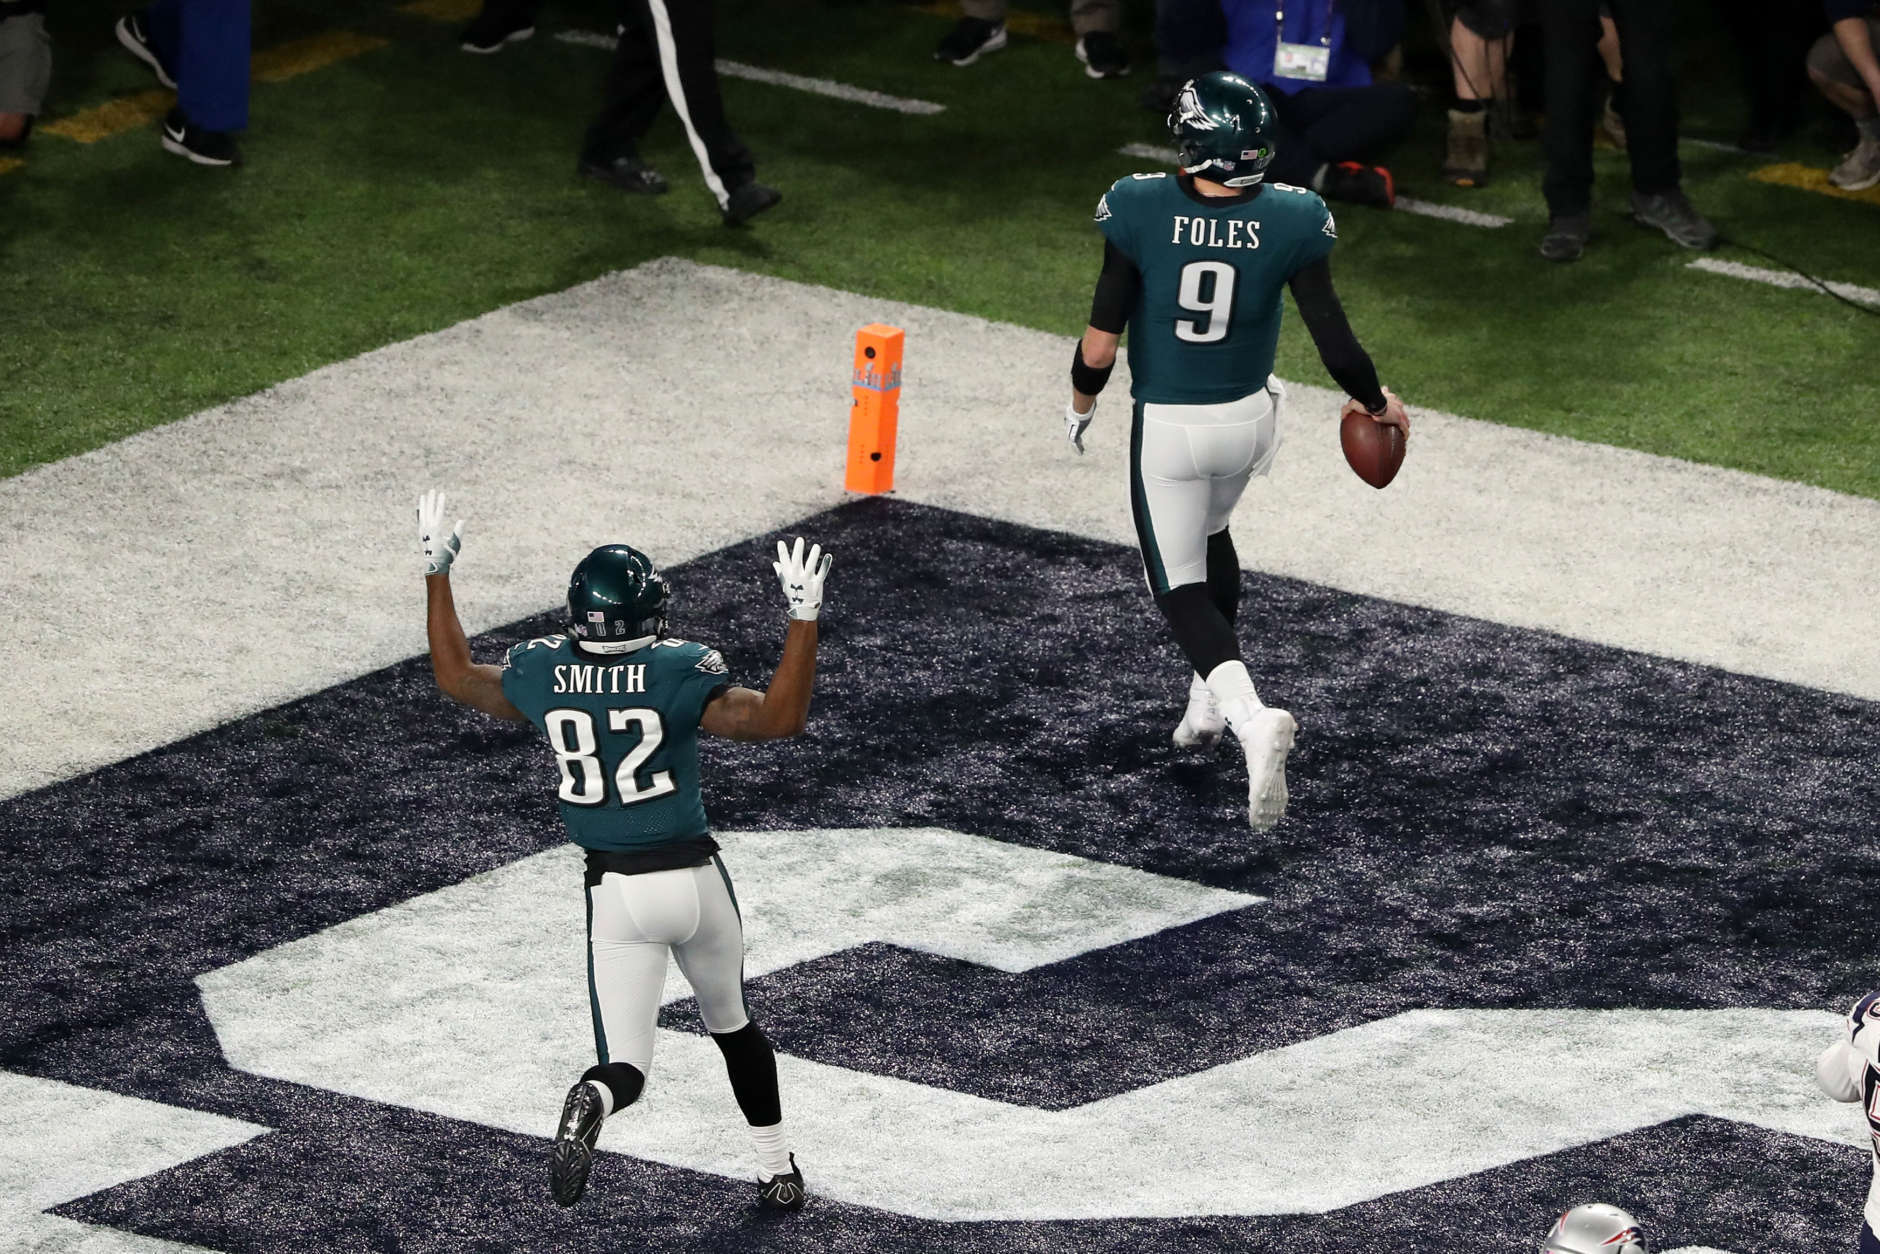 MINNEAPOLIS, MN - FEBRUARY 04:  Nick Foles #9 of the Philadelphia Eagles is congratulated by his teammate Torrey Smith #82 after his 1-yard touchdown reception during the second quarter against the New England Patriots in Super Bowl LII at U.S. Bank Stadium on February 4, 2018 in Minneapolis, Minnesota.  (Photo by Christian Petersen/Getty Images)